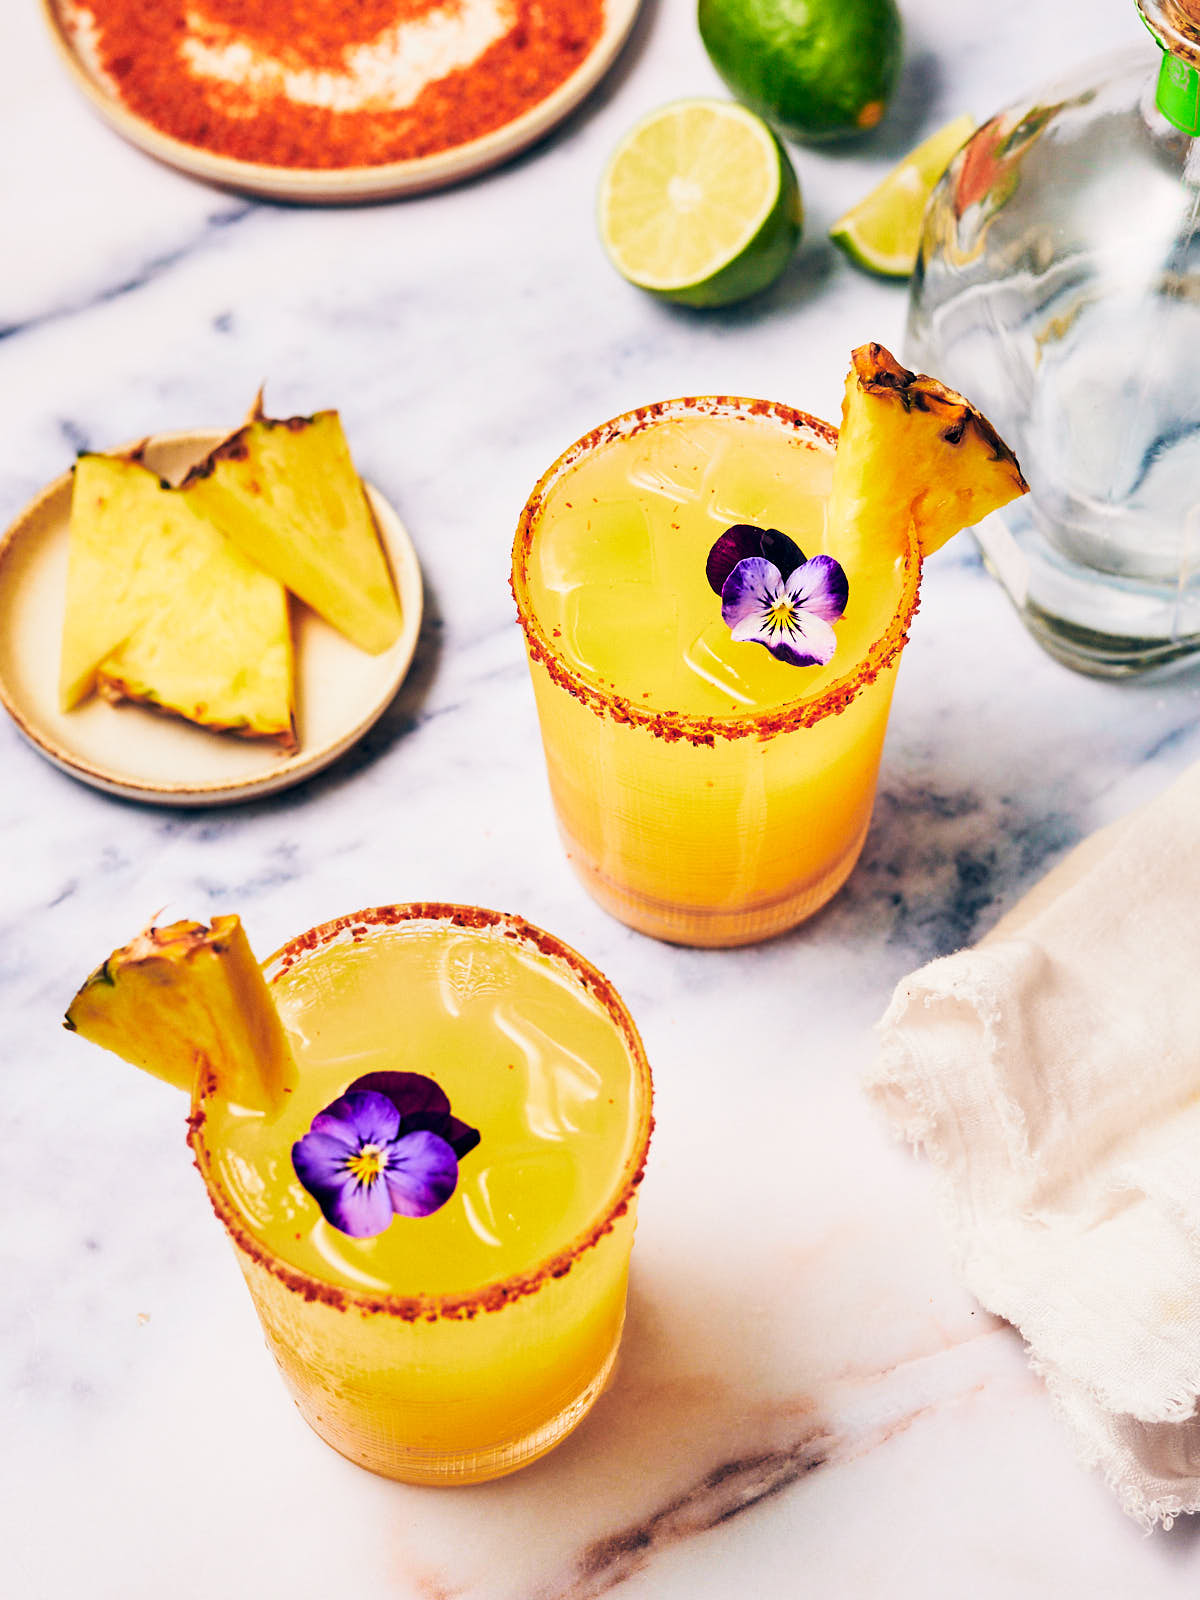 Spicy Pineapple Margarita cocktails made with the best Jalapeño Simple Syrup.